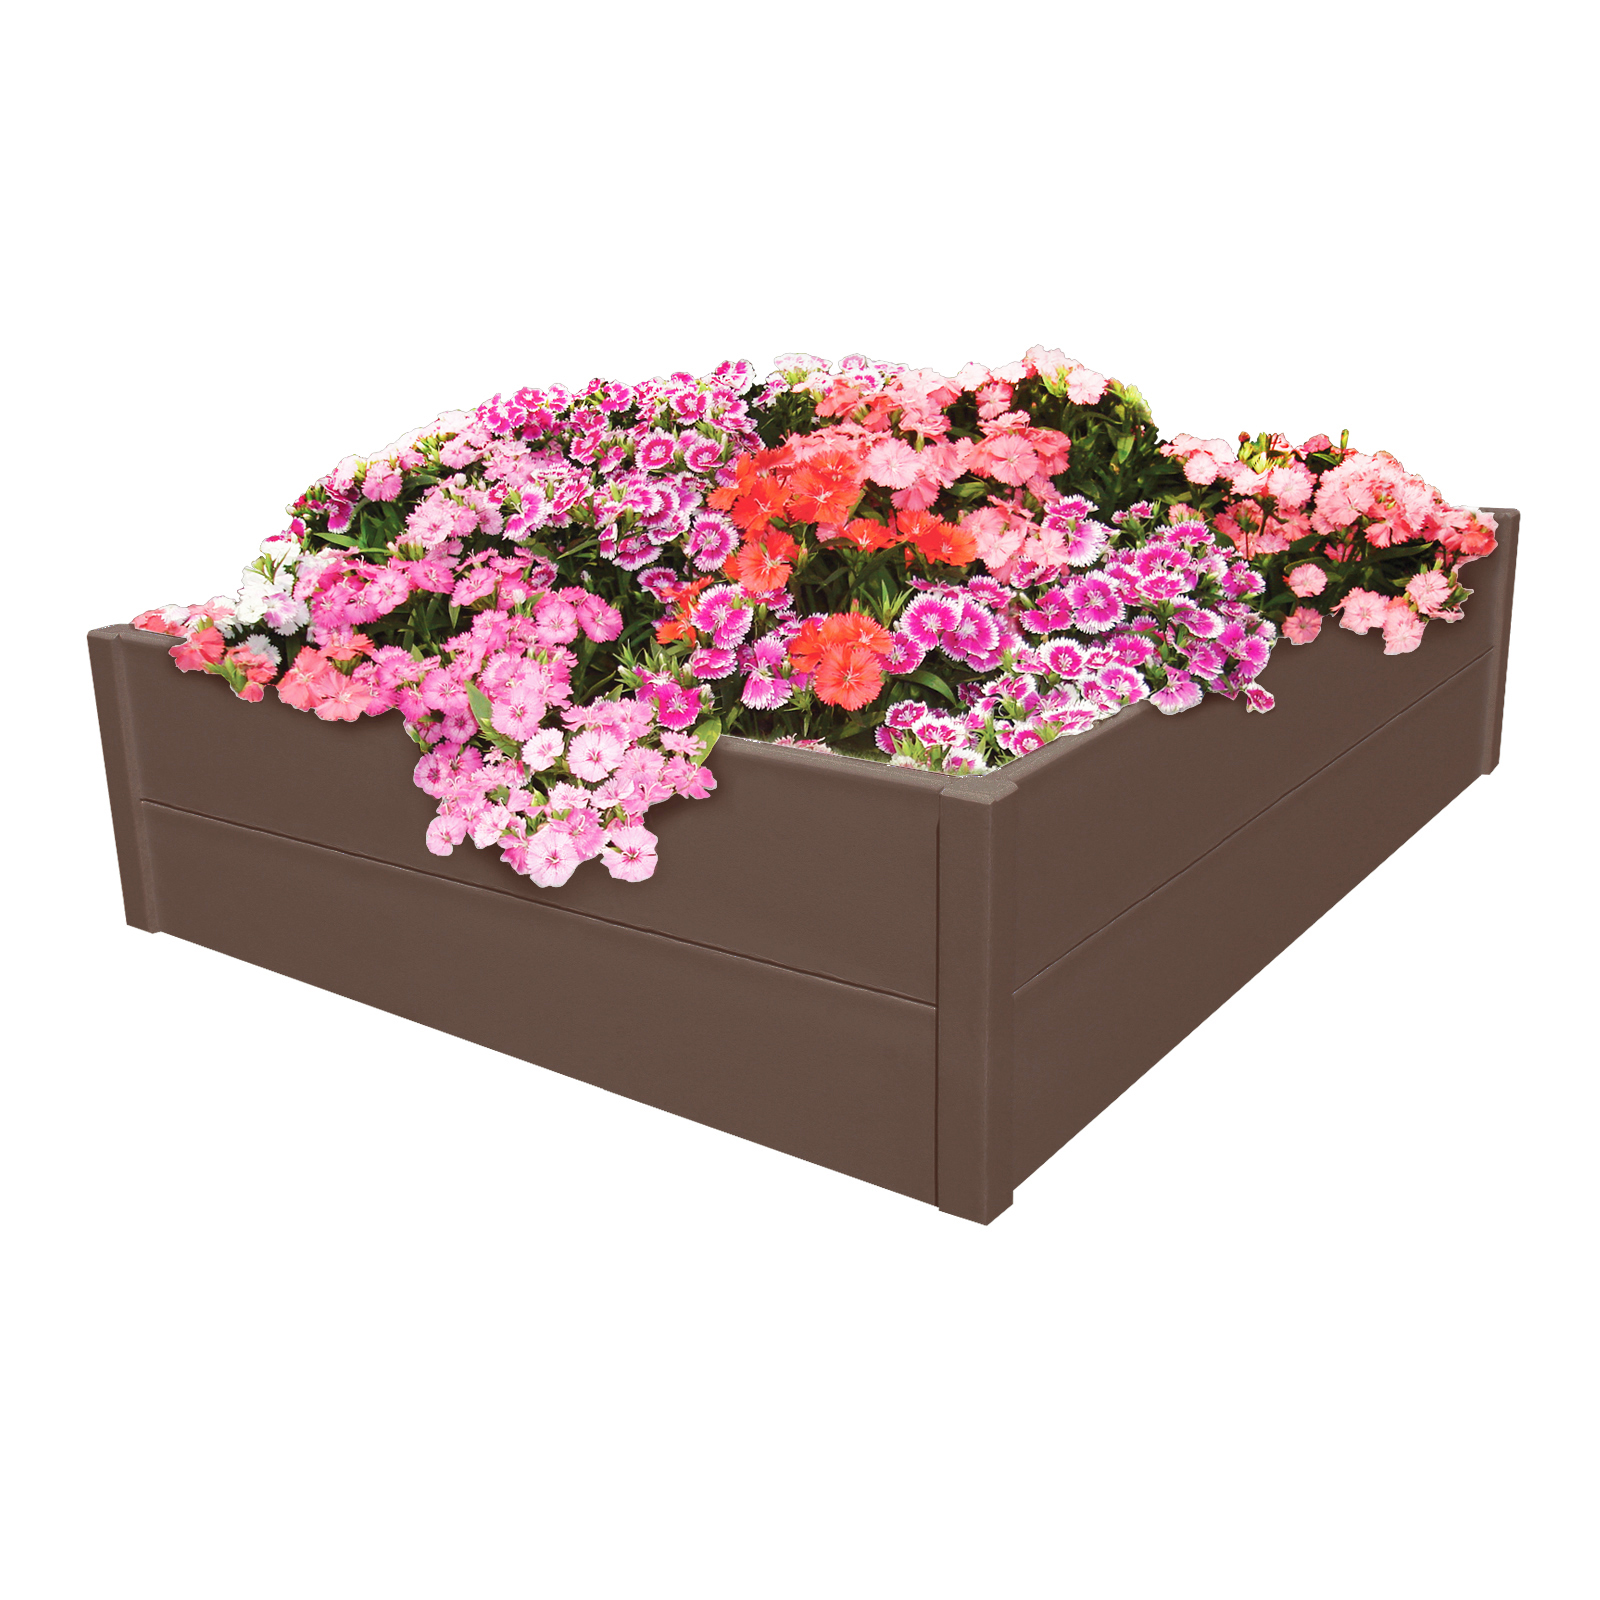 Raised Garden and Sand Commercial Grade Box 2 Tier, Brown